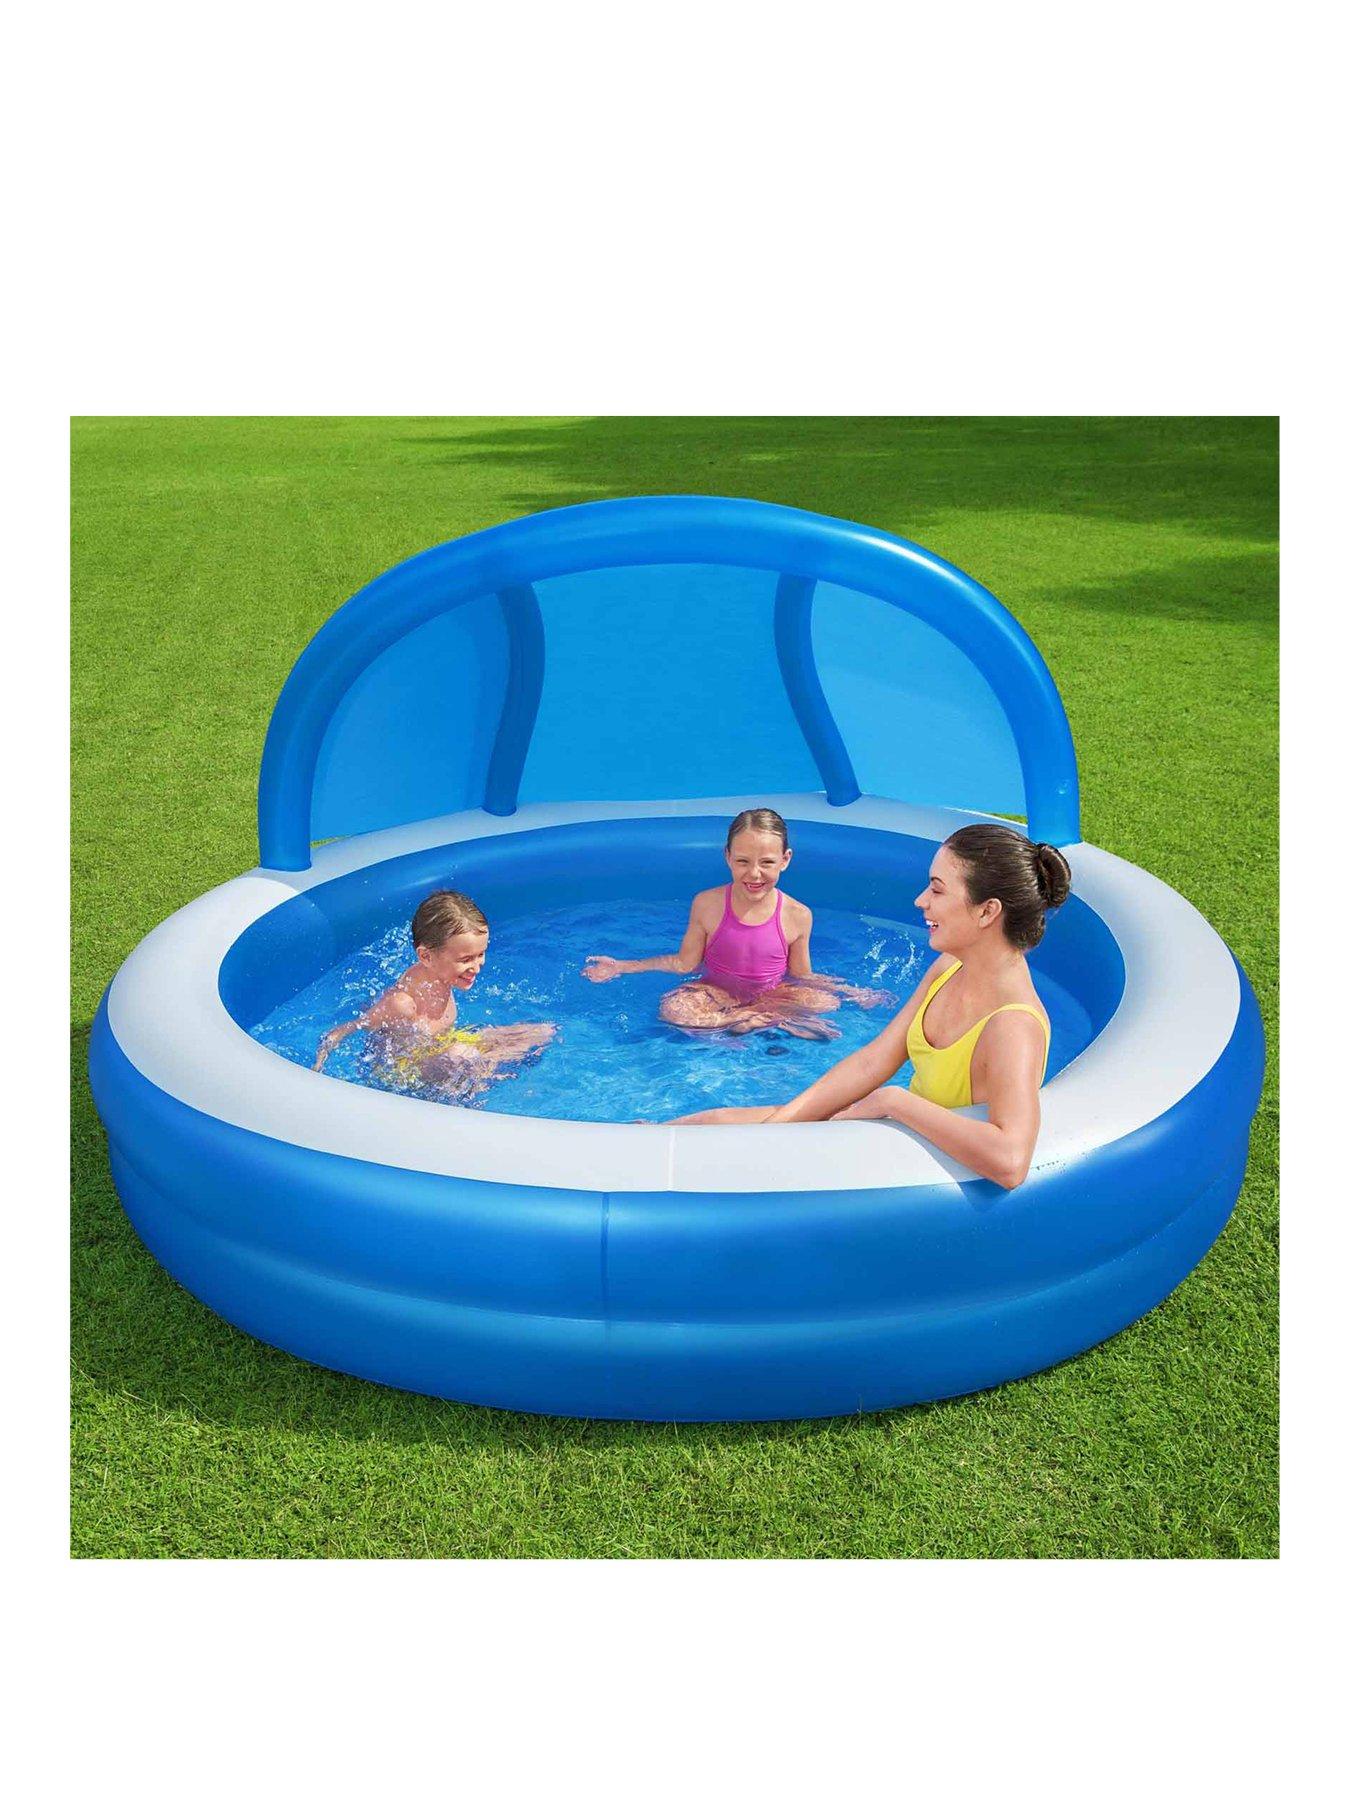 Floating Chair Details about   Inflatable Sprinkler Water Toys Summer Outdoor Play Pool 